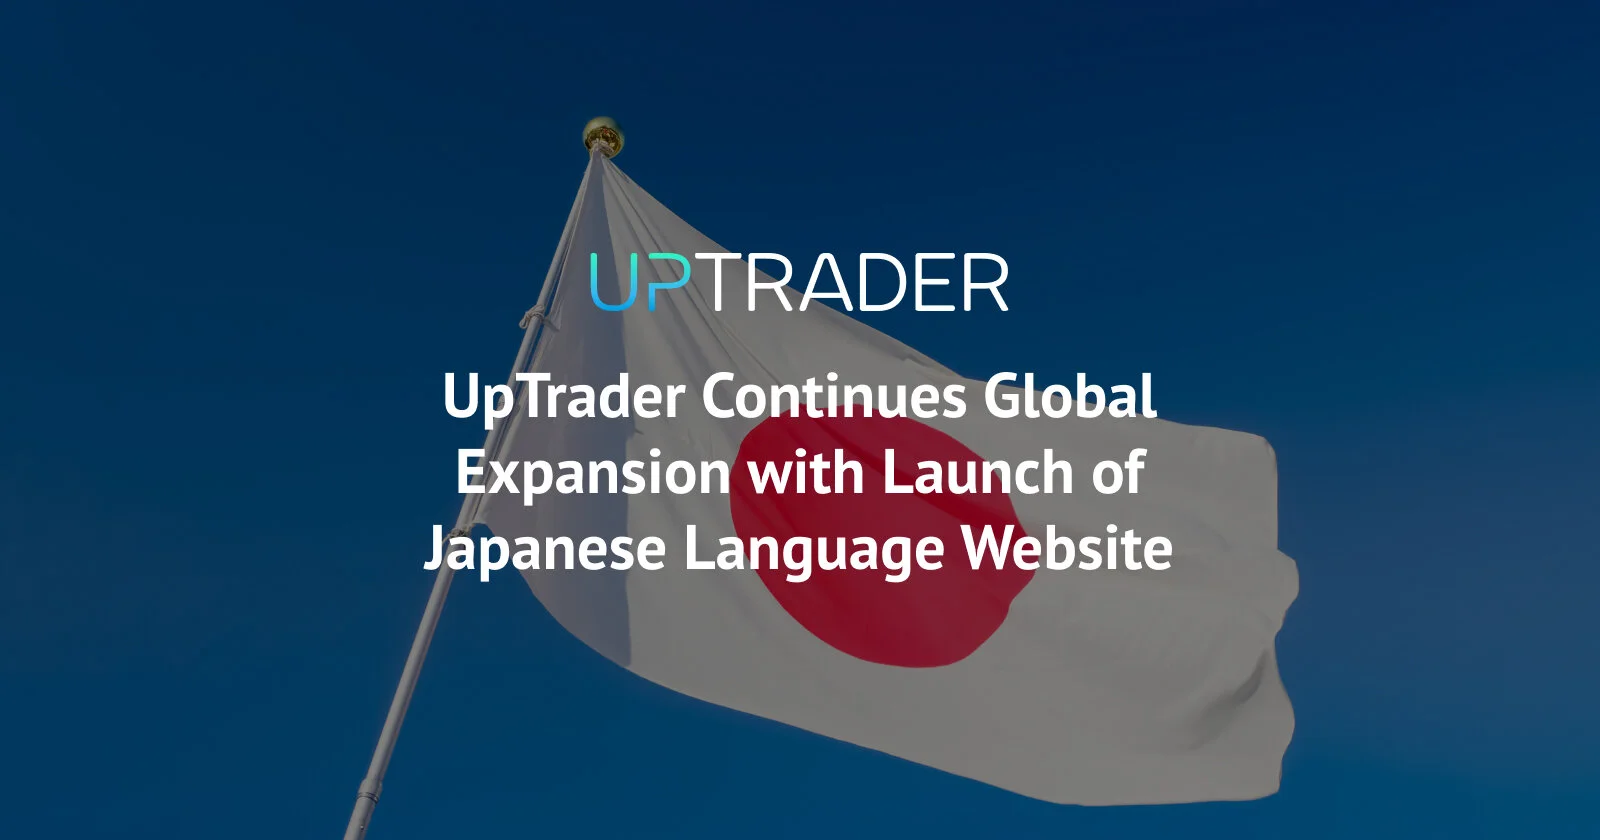 UpTrader Continues Global Expansion with Launch of Japanese Language Website